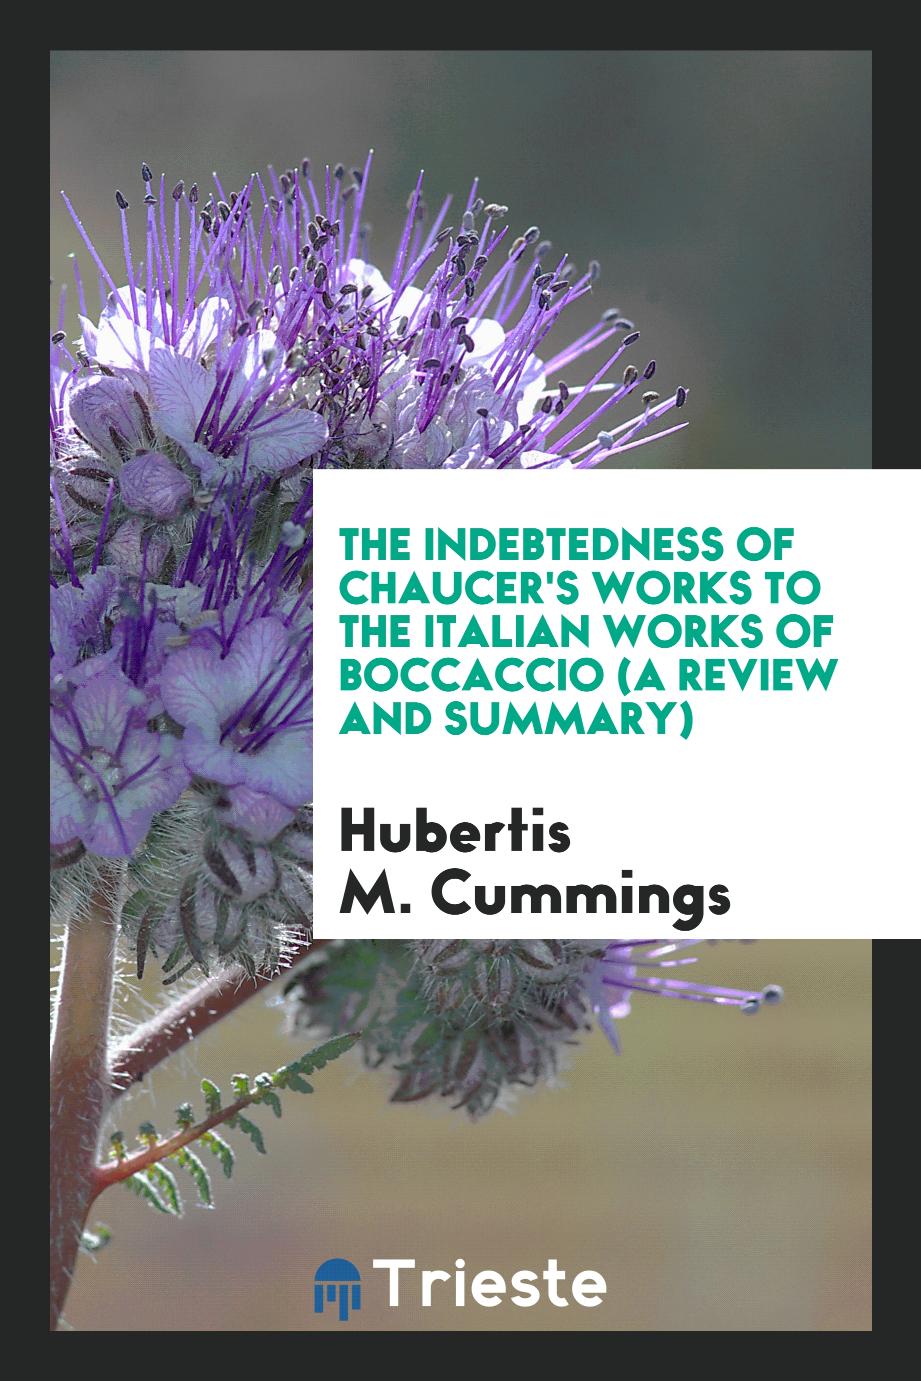 The Indebtedness of Chaucer's Works to the Italian Works of Boccaccio (a Review and Summary)